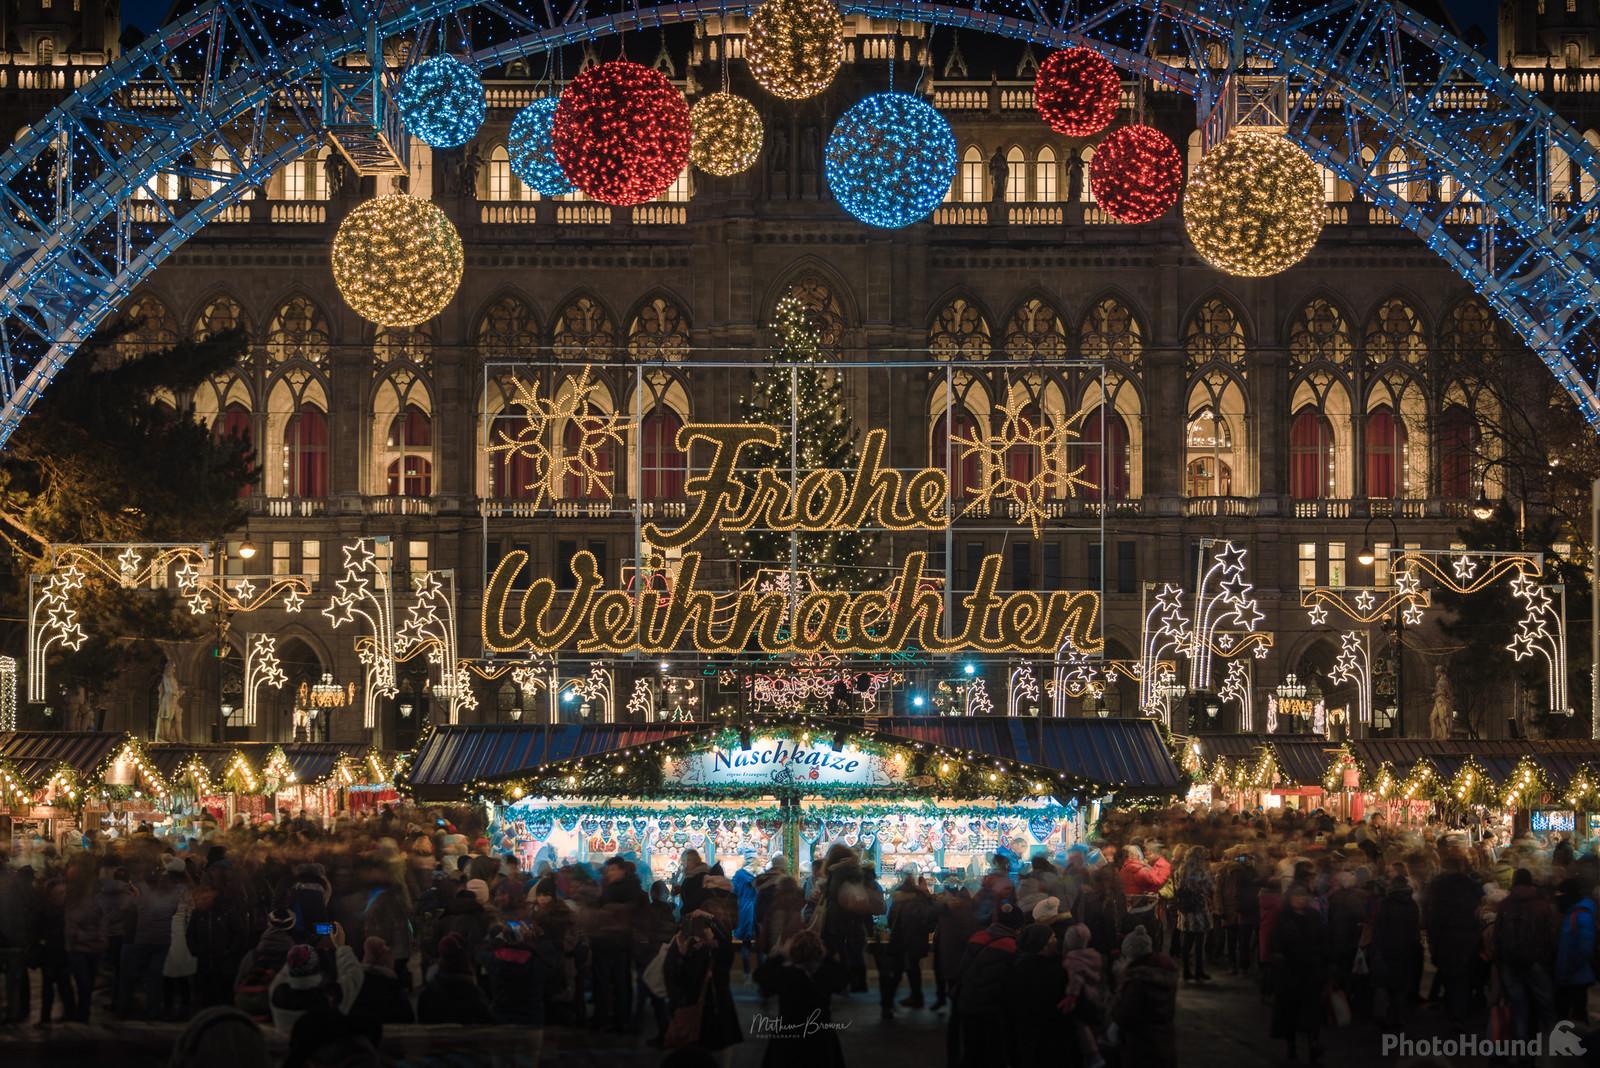 Image of Vienna Christmas Markets by Mathew Browne